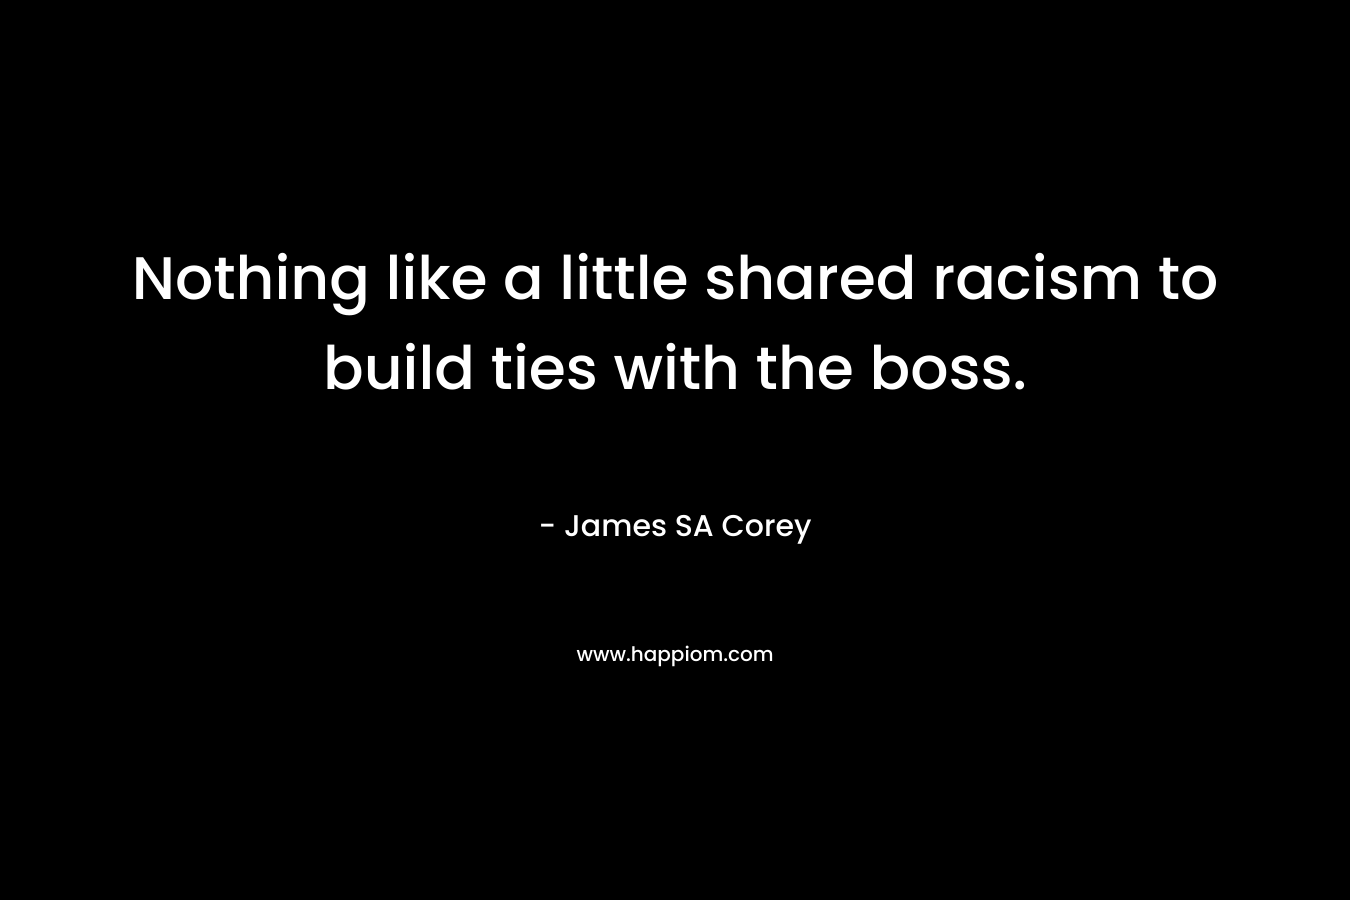 Nothing like a little shared racism to build ties with the boss. – James SA Corey